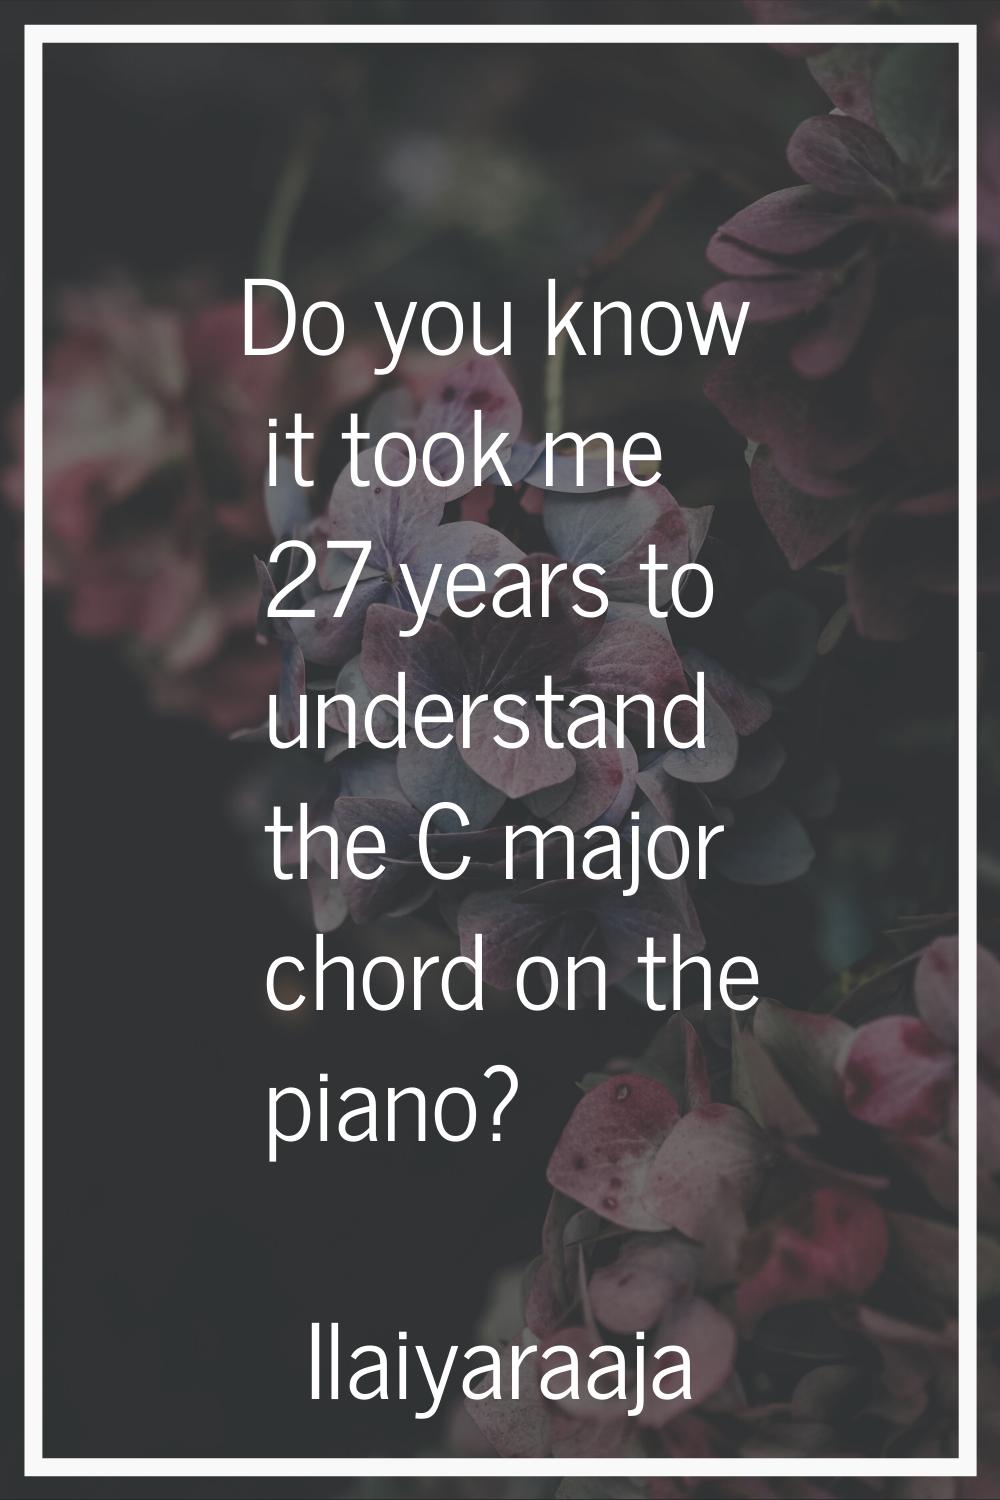 Do you know it took me 27 years to understand the C major chord on the piano?